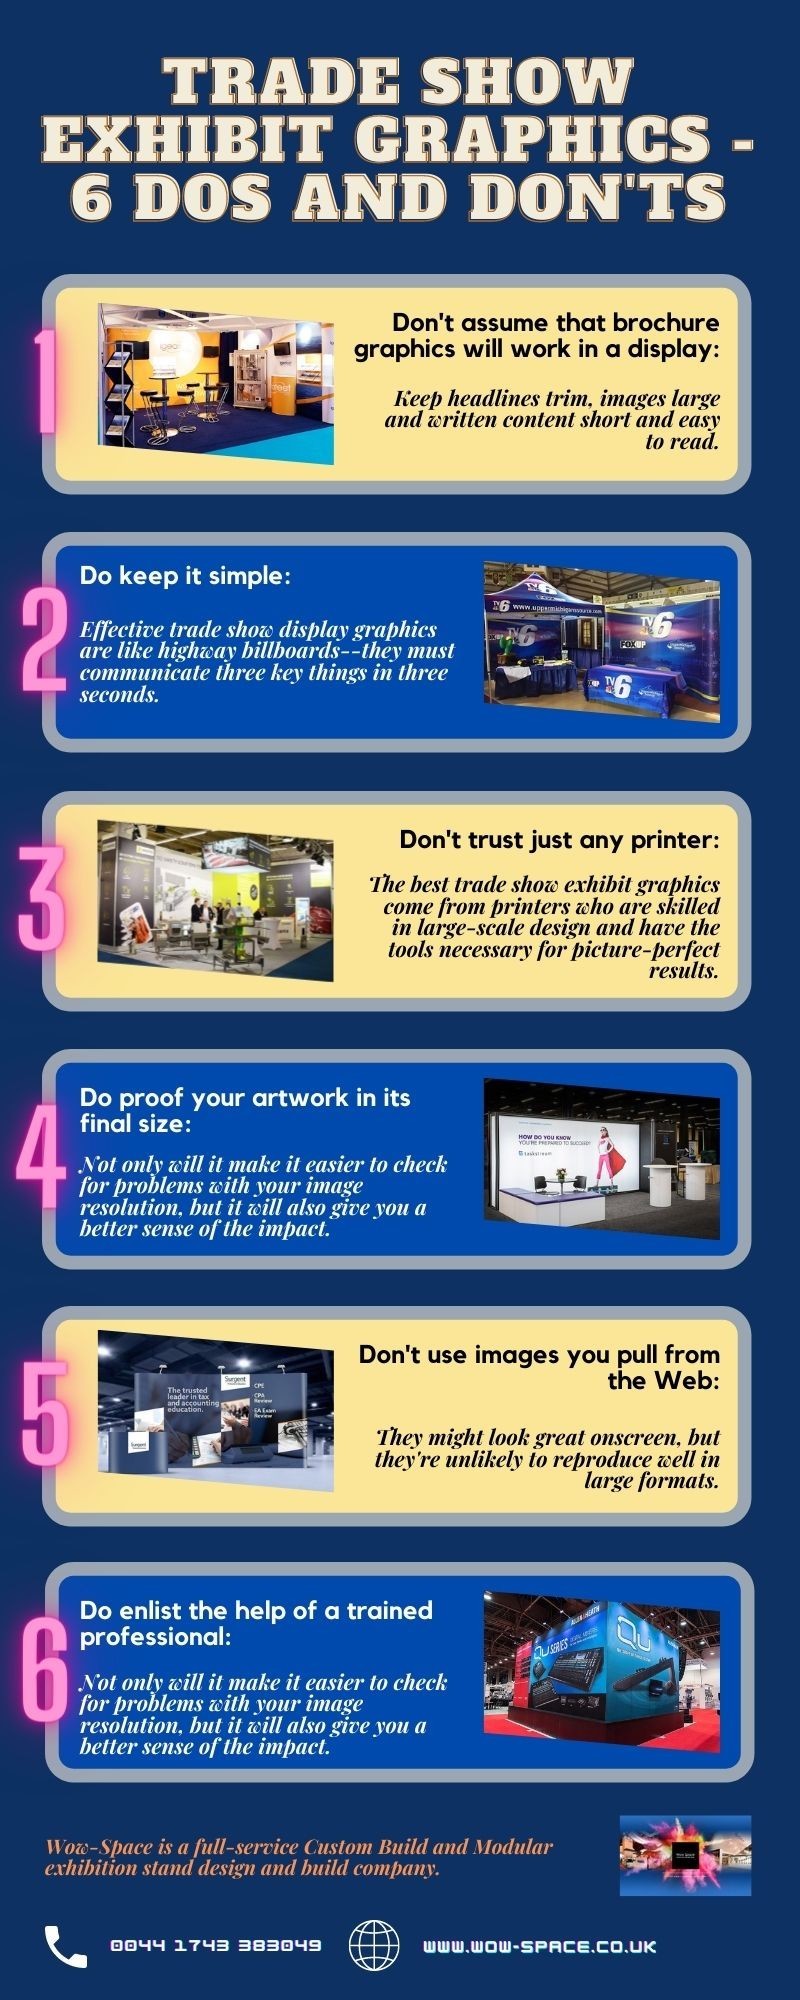 Trade Show Exhibit Graphics - 6 Dos and Don'ts